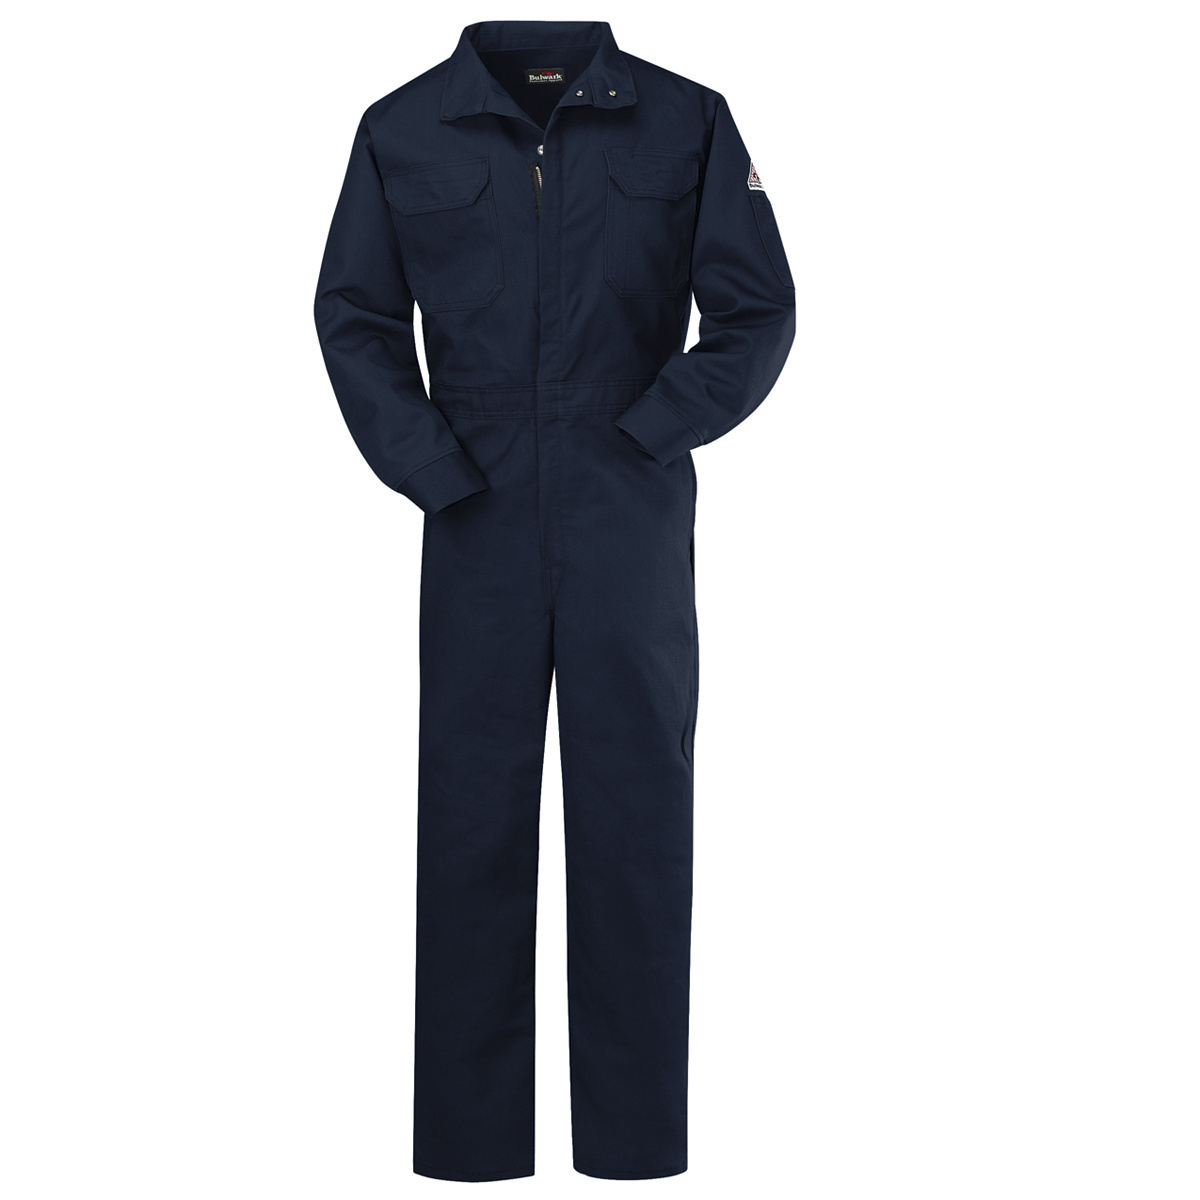 Bulwark® 44 Regular Navy Blue Westex Ultrasoft®/Cotton/Nylon Flame Resistant Coveralls With Zipper Front Closure